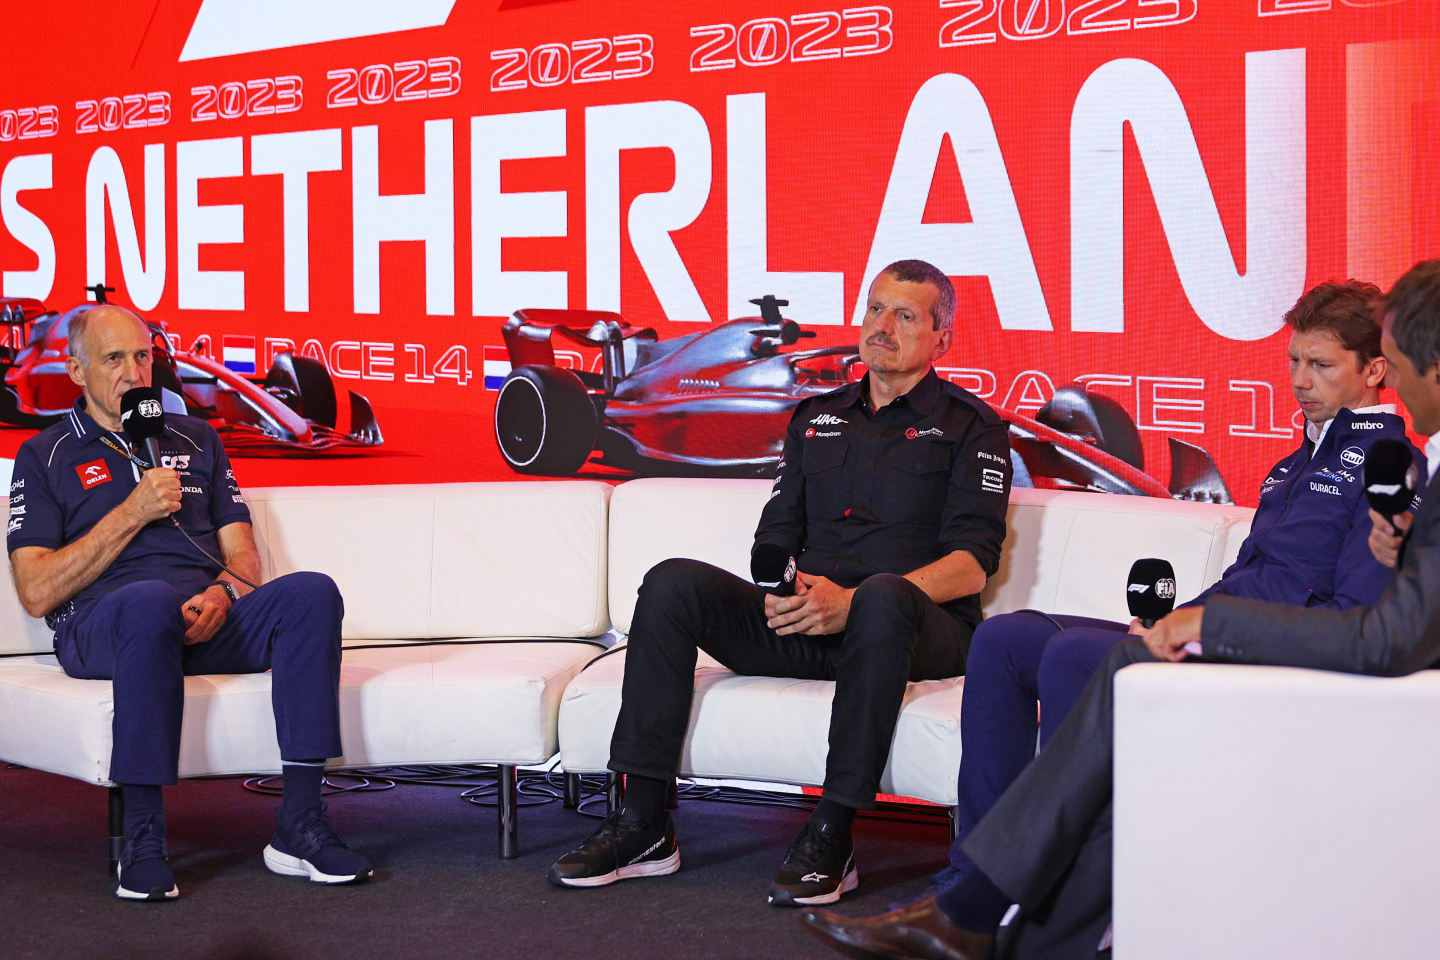 ZANDVOORT, NETHERLANDS - AUGUST 25: Scuderia AlphaTauri Team Principal Franz Tost, Haas F1 Team Principal Guenther Steiner and James Vowles, Team Principal of Williams attend the Team Principals Press Conference during practice ahead of the F1 Grand Prix of The Netherlands at Circuit Zandvoort on August 25, 2023 in Zandvoort, Netherlands. (Photo by Dean Mouhtaropoulos/Getty Images)